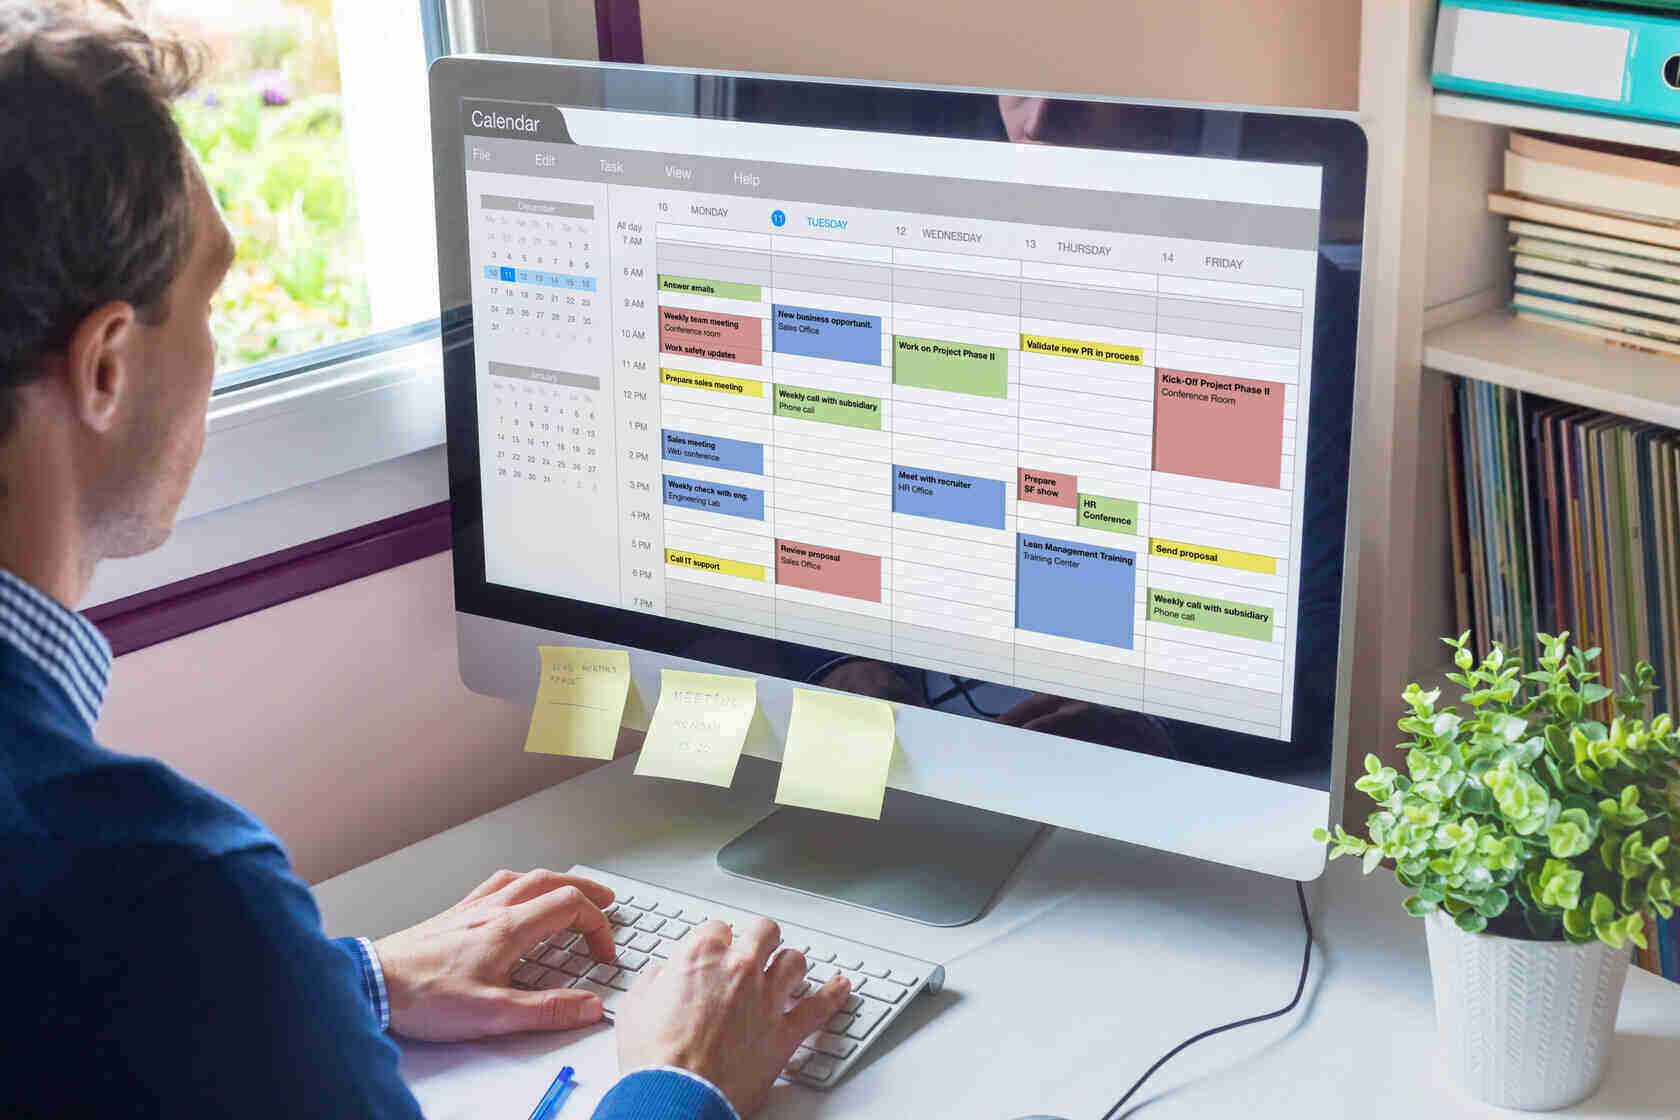 The 4 benefits of using productivity tools in your business